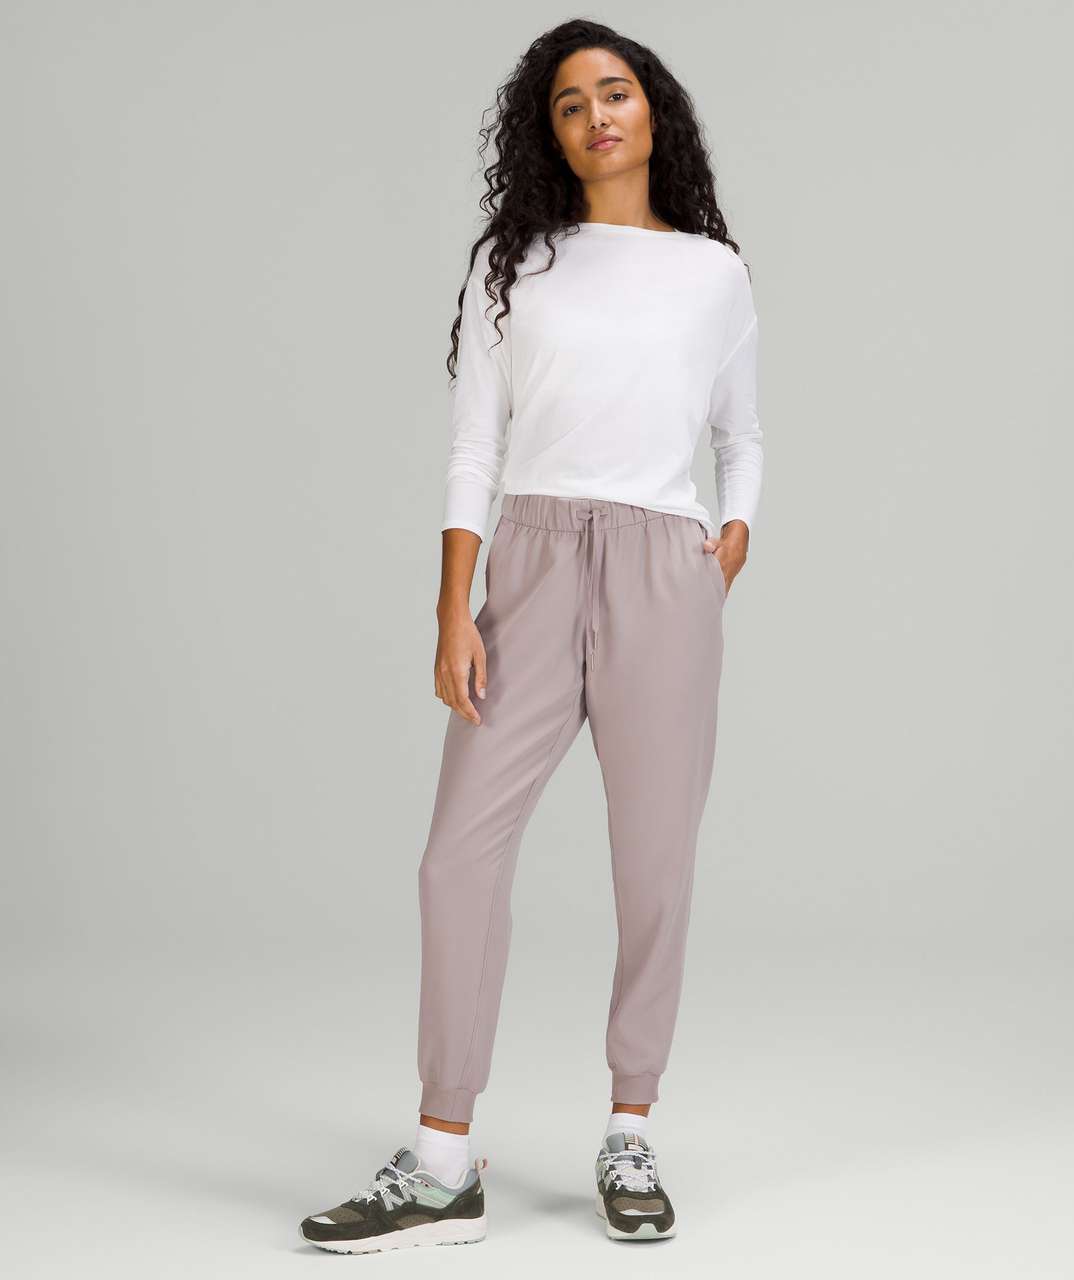 NWT Lululemon On The Fly Jogger 28 Woven Dark Chrome Pink Size 12